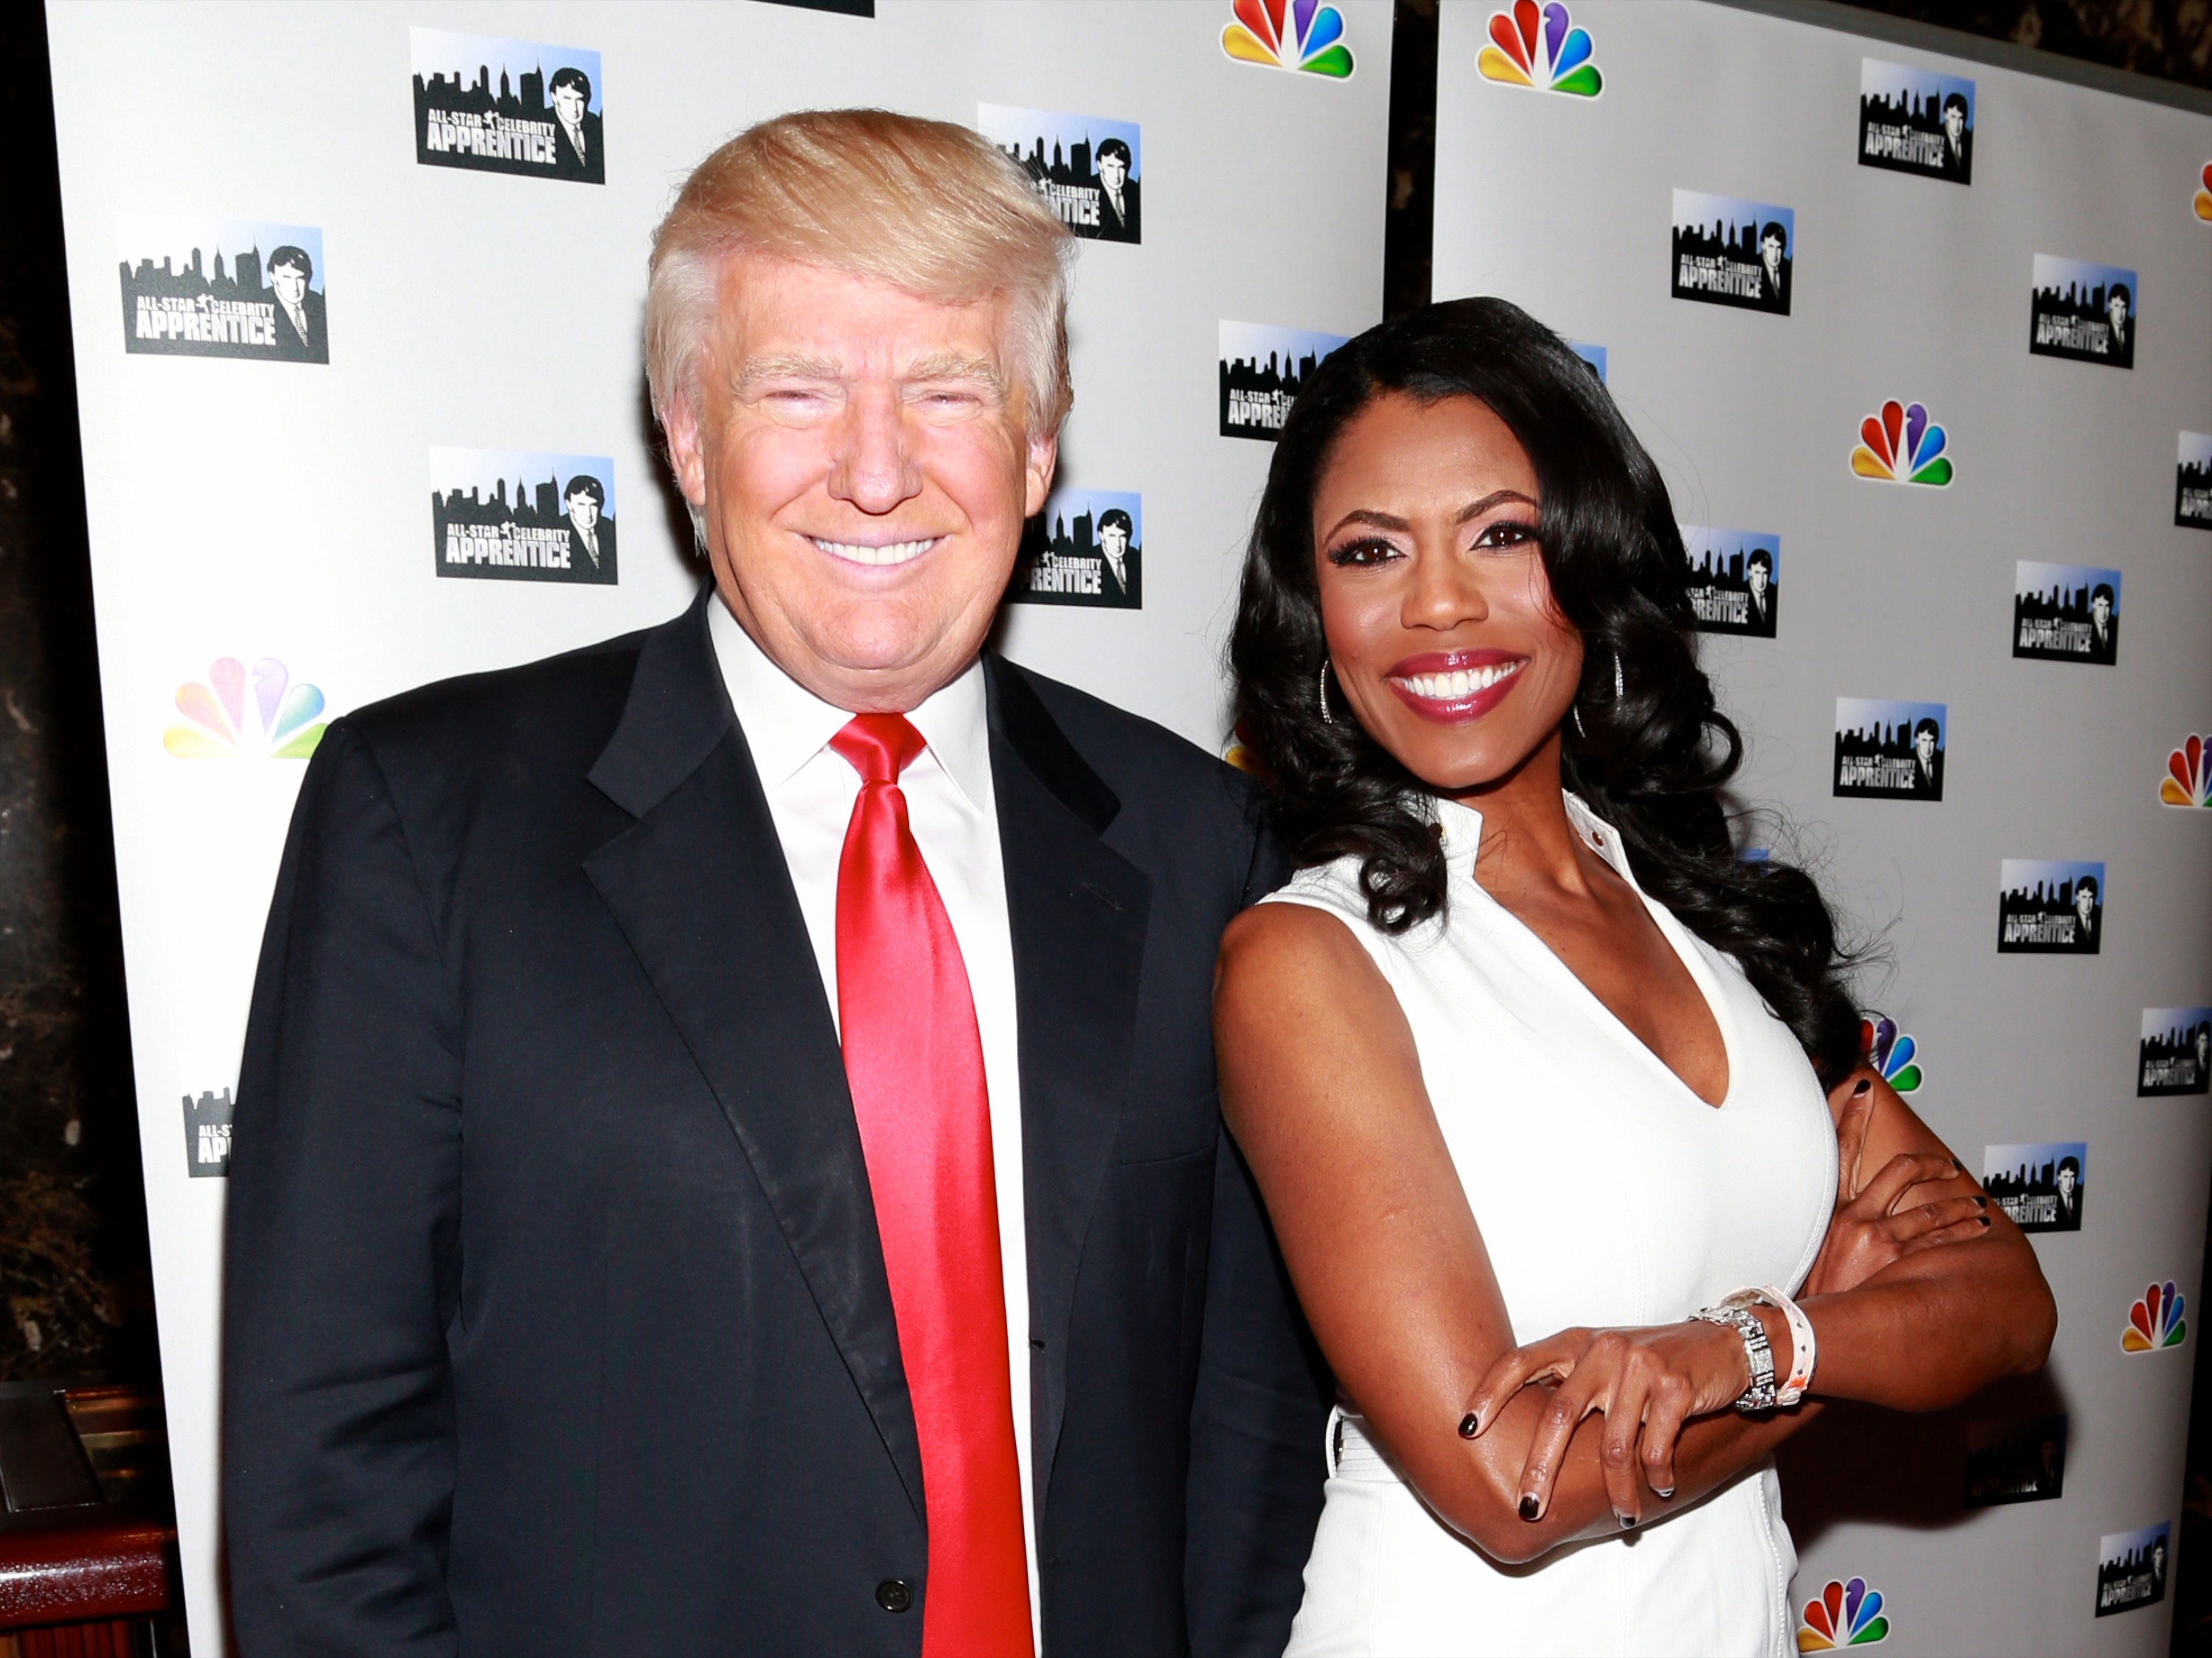 Donald Trump Is Not A Racist For His Comments On Omarosa- White House